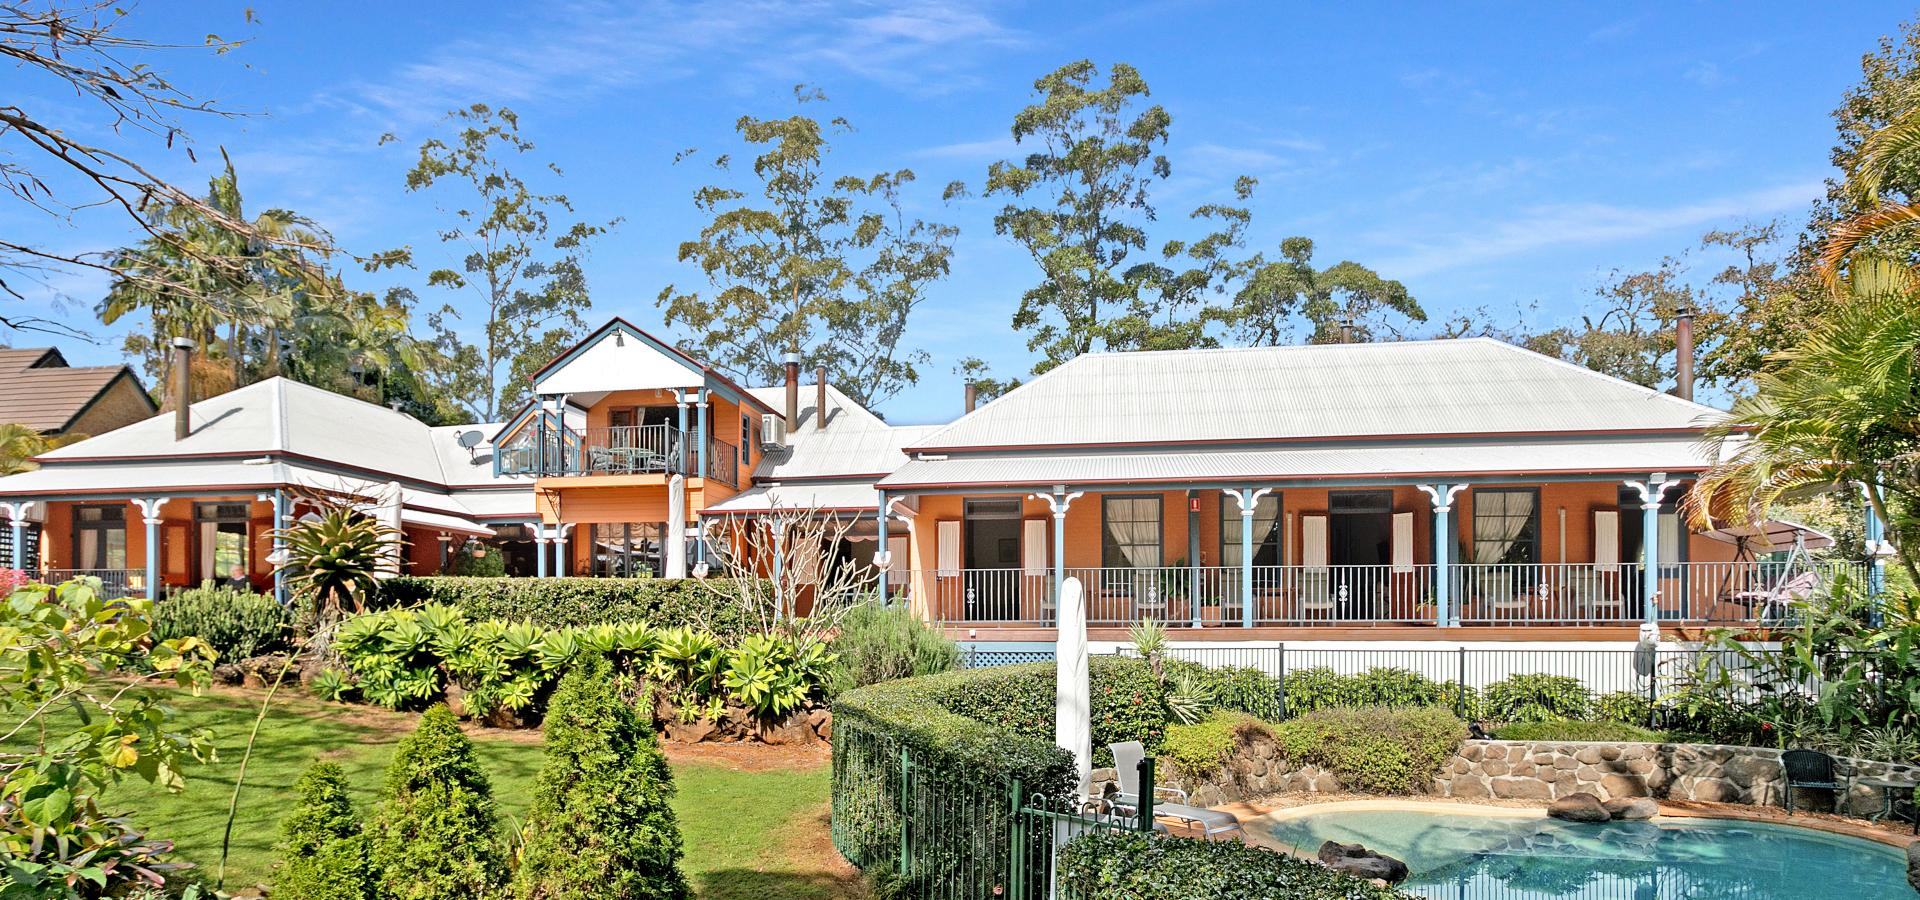 AMAZING MONTVILLE PROPERTY!!!!!!  CALL TO ARRANGE YOUR PRIVATE INSPECTION!!!!!!!